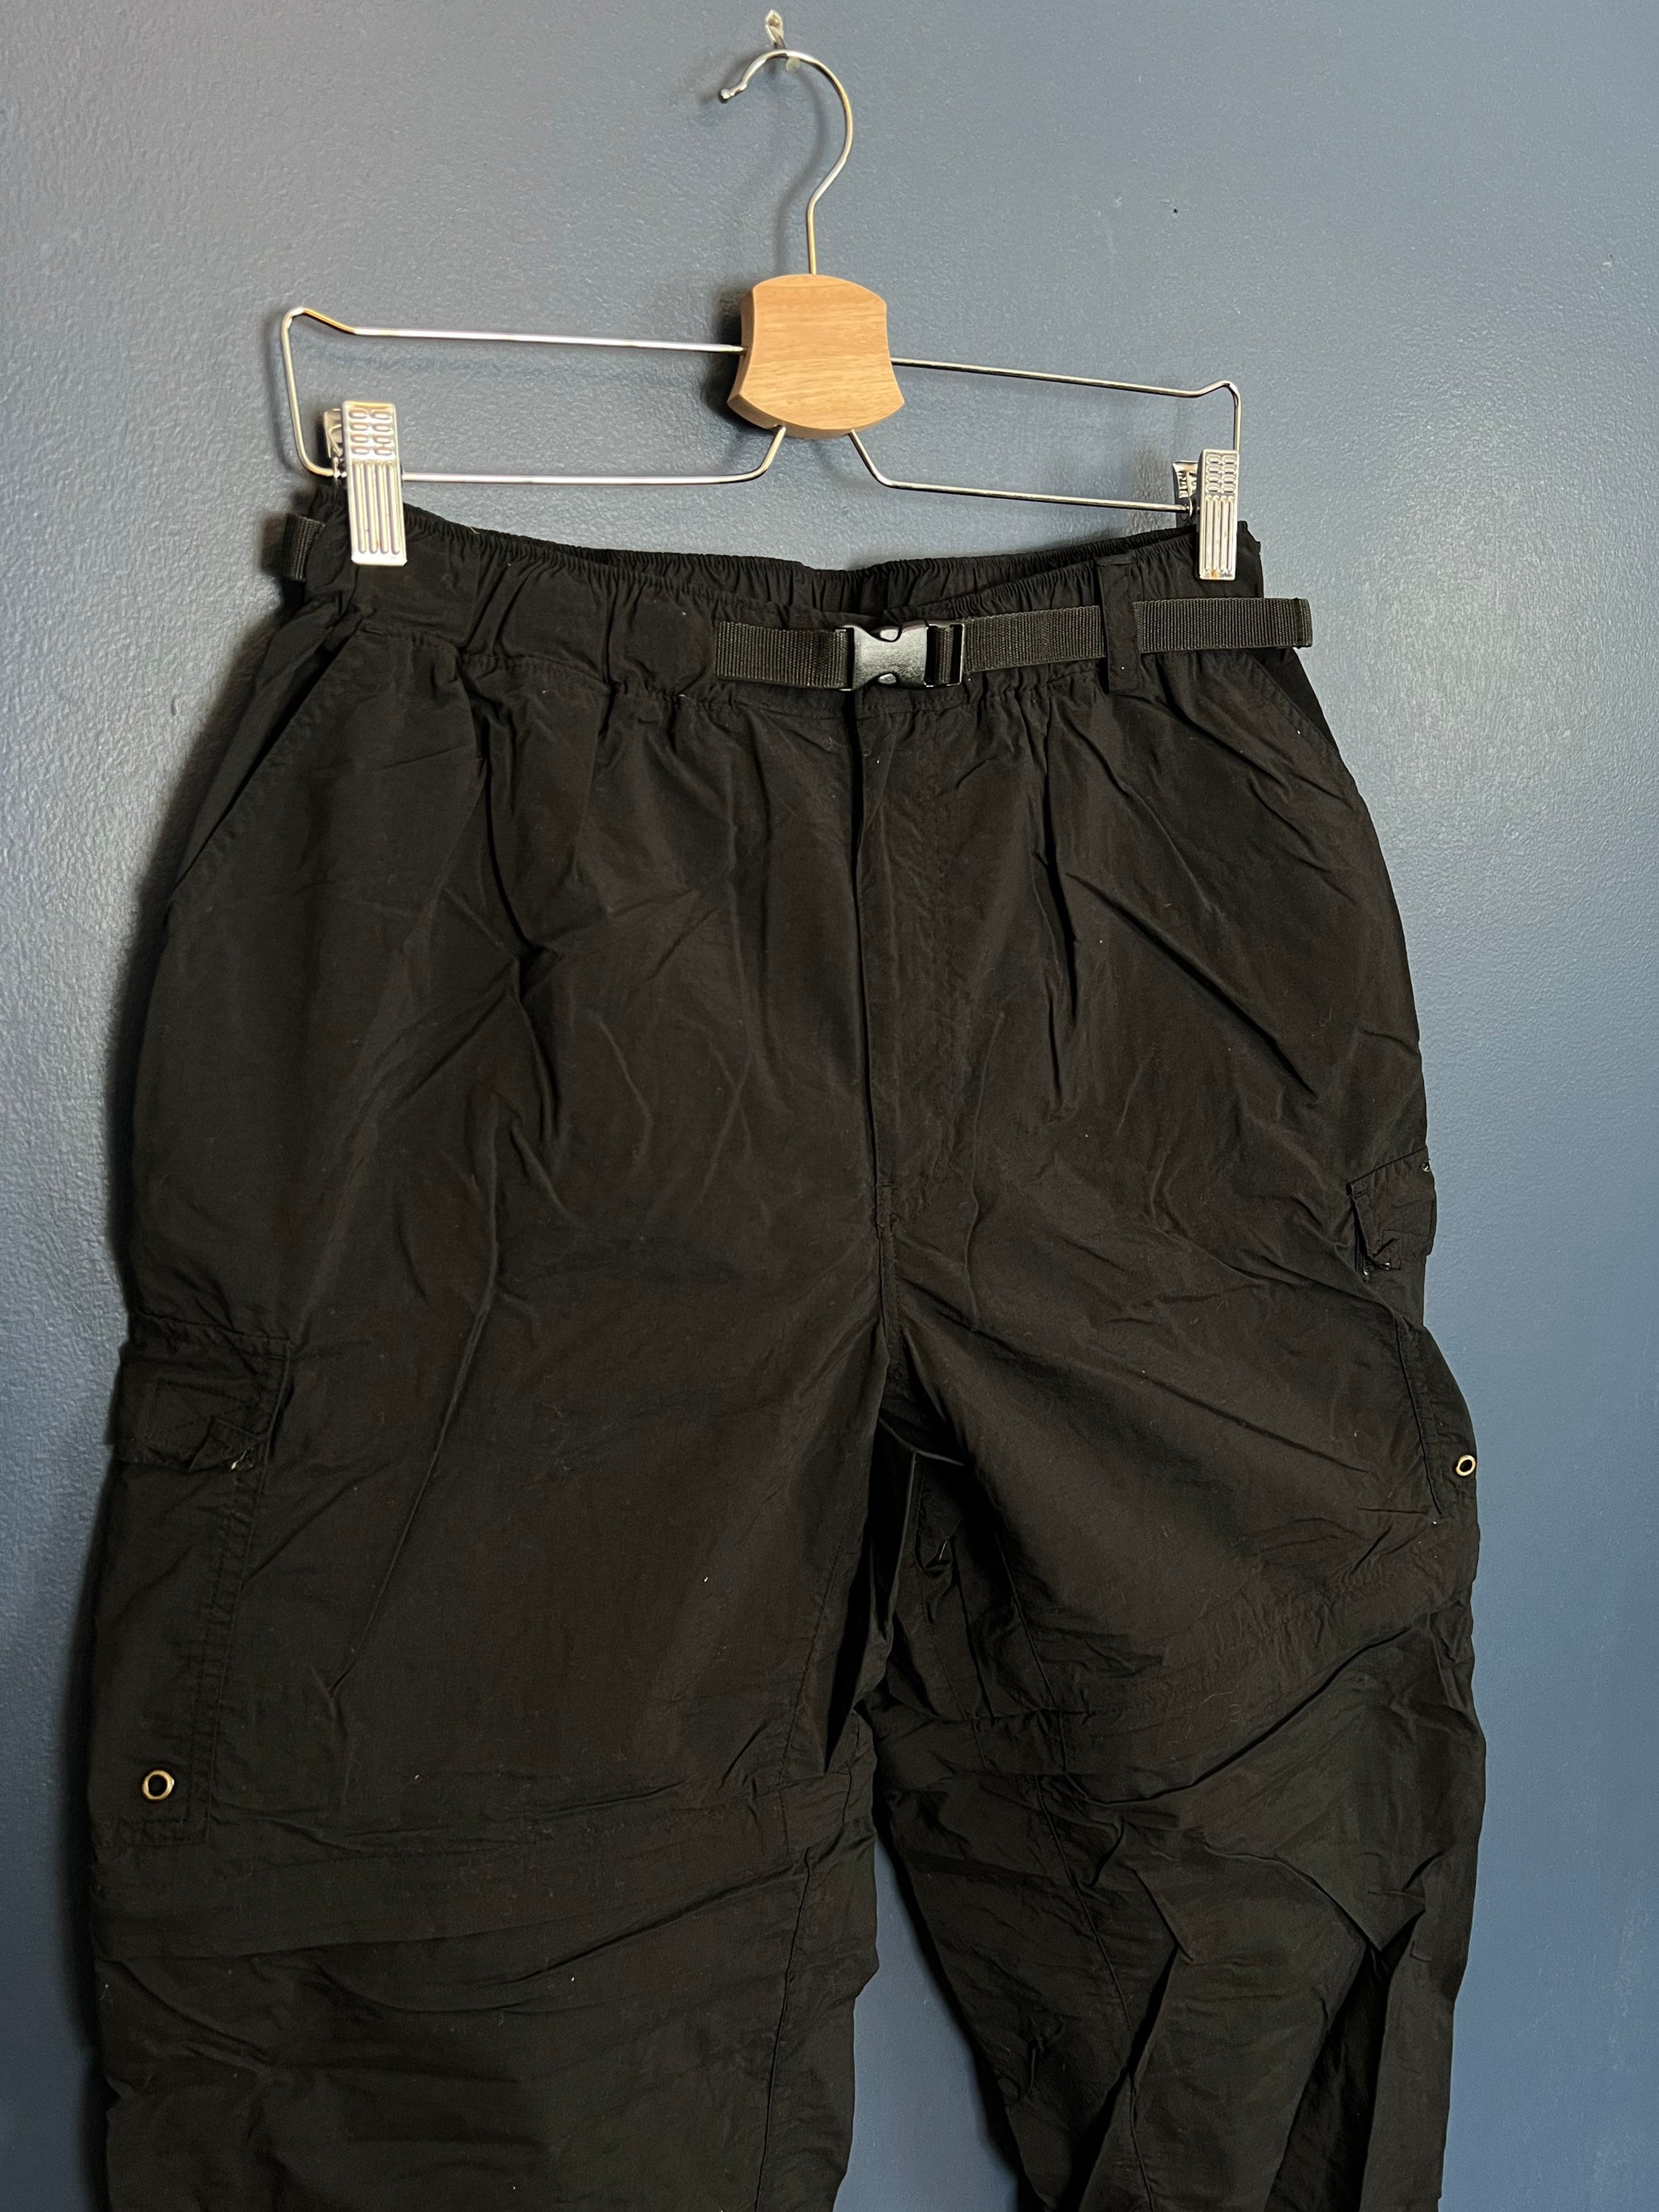 Cargo crop pants with zipper detailing can be warn as 34 pants or just  below the knee shorts Cue  Cropped pants Clothes design Cargo shorts